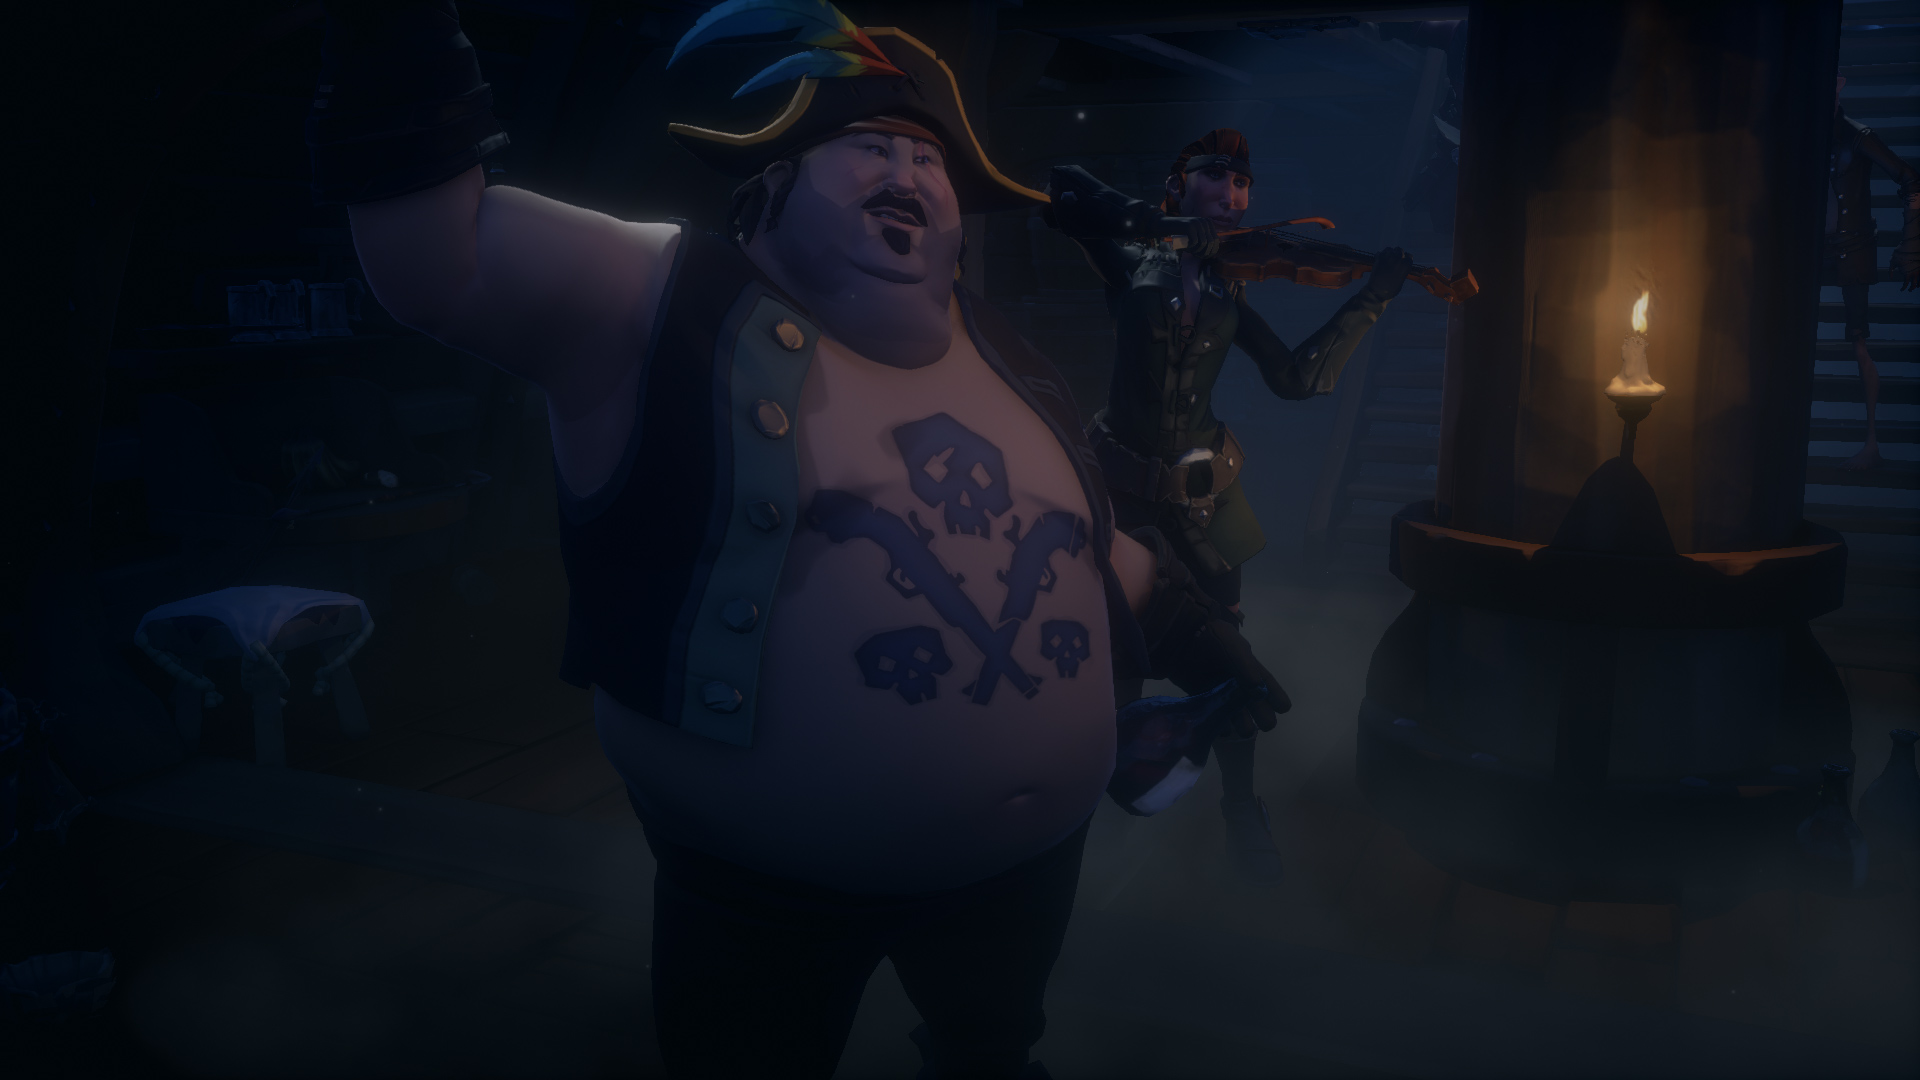 Acted as Principal Artist:  created all lighting, animation, cinematography, VFX, using Rare's base assets for their upcoming game Sea of Thieves. Created in Unreal Engine 4.